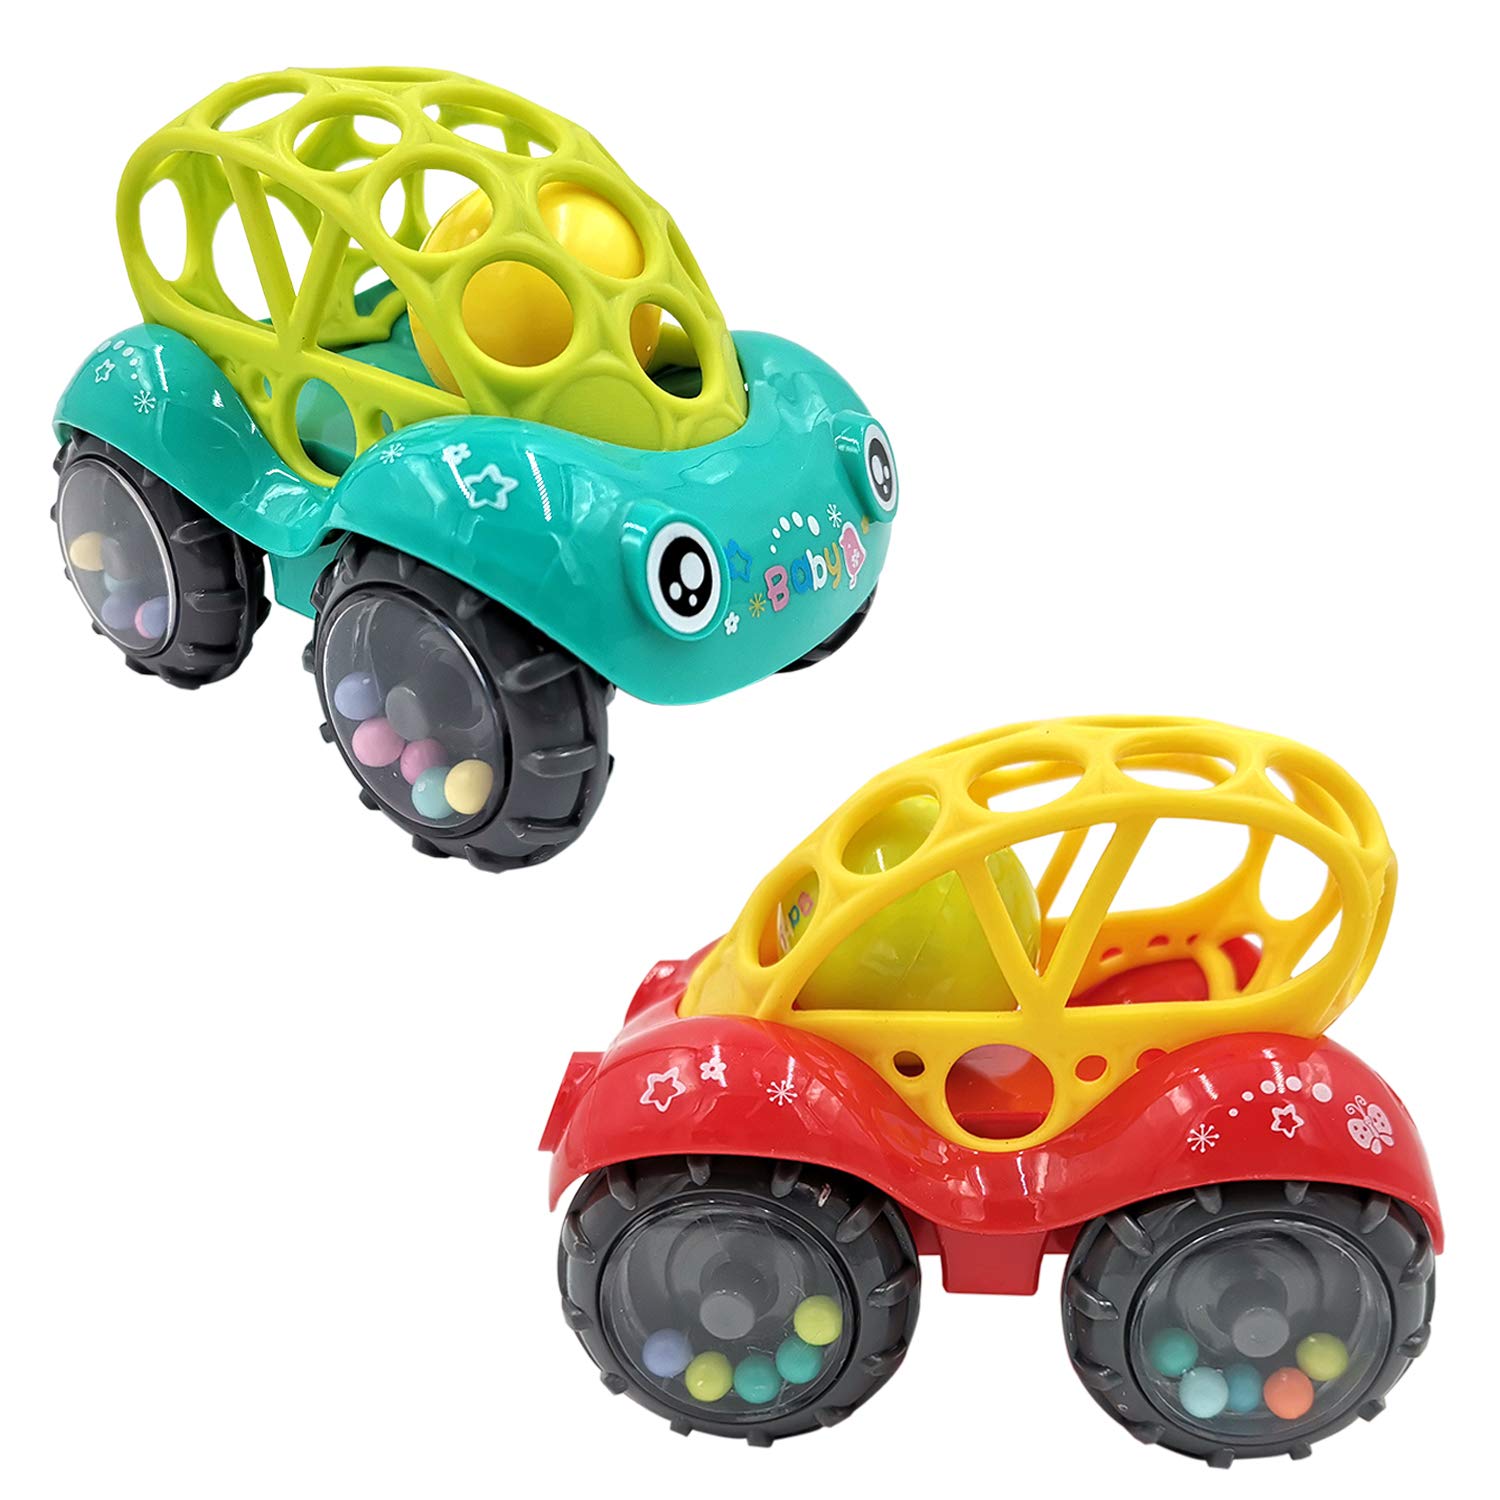 ZHIHUAN Baby Boy Toys for 1-5 Years Old ,Baby Toys 6-18 Months Baby Gifts for 3-12 Months Toy Car for Girls 1-5 Years Old